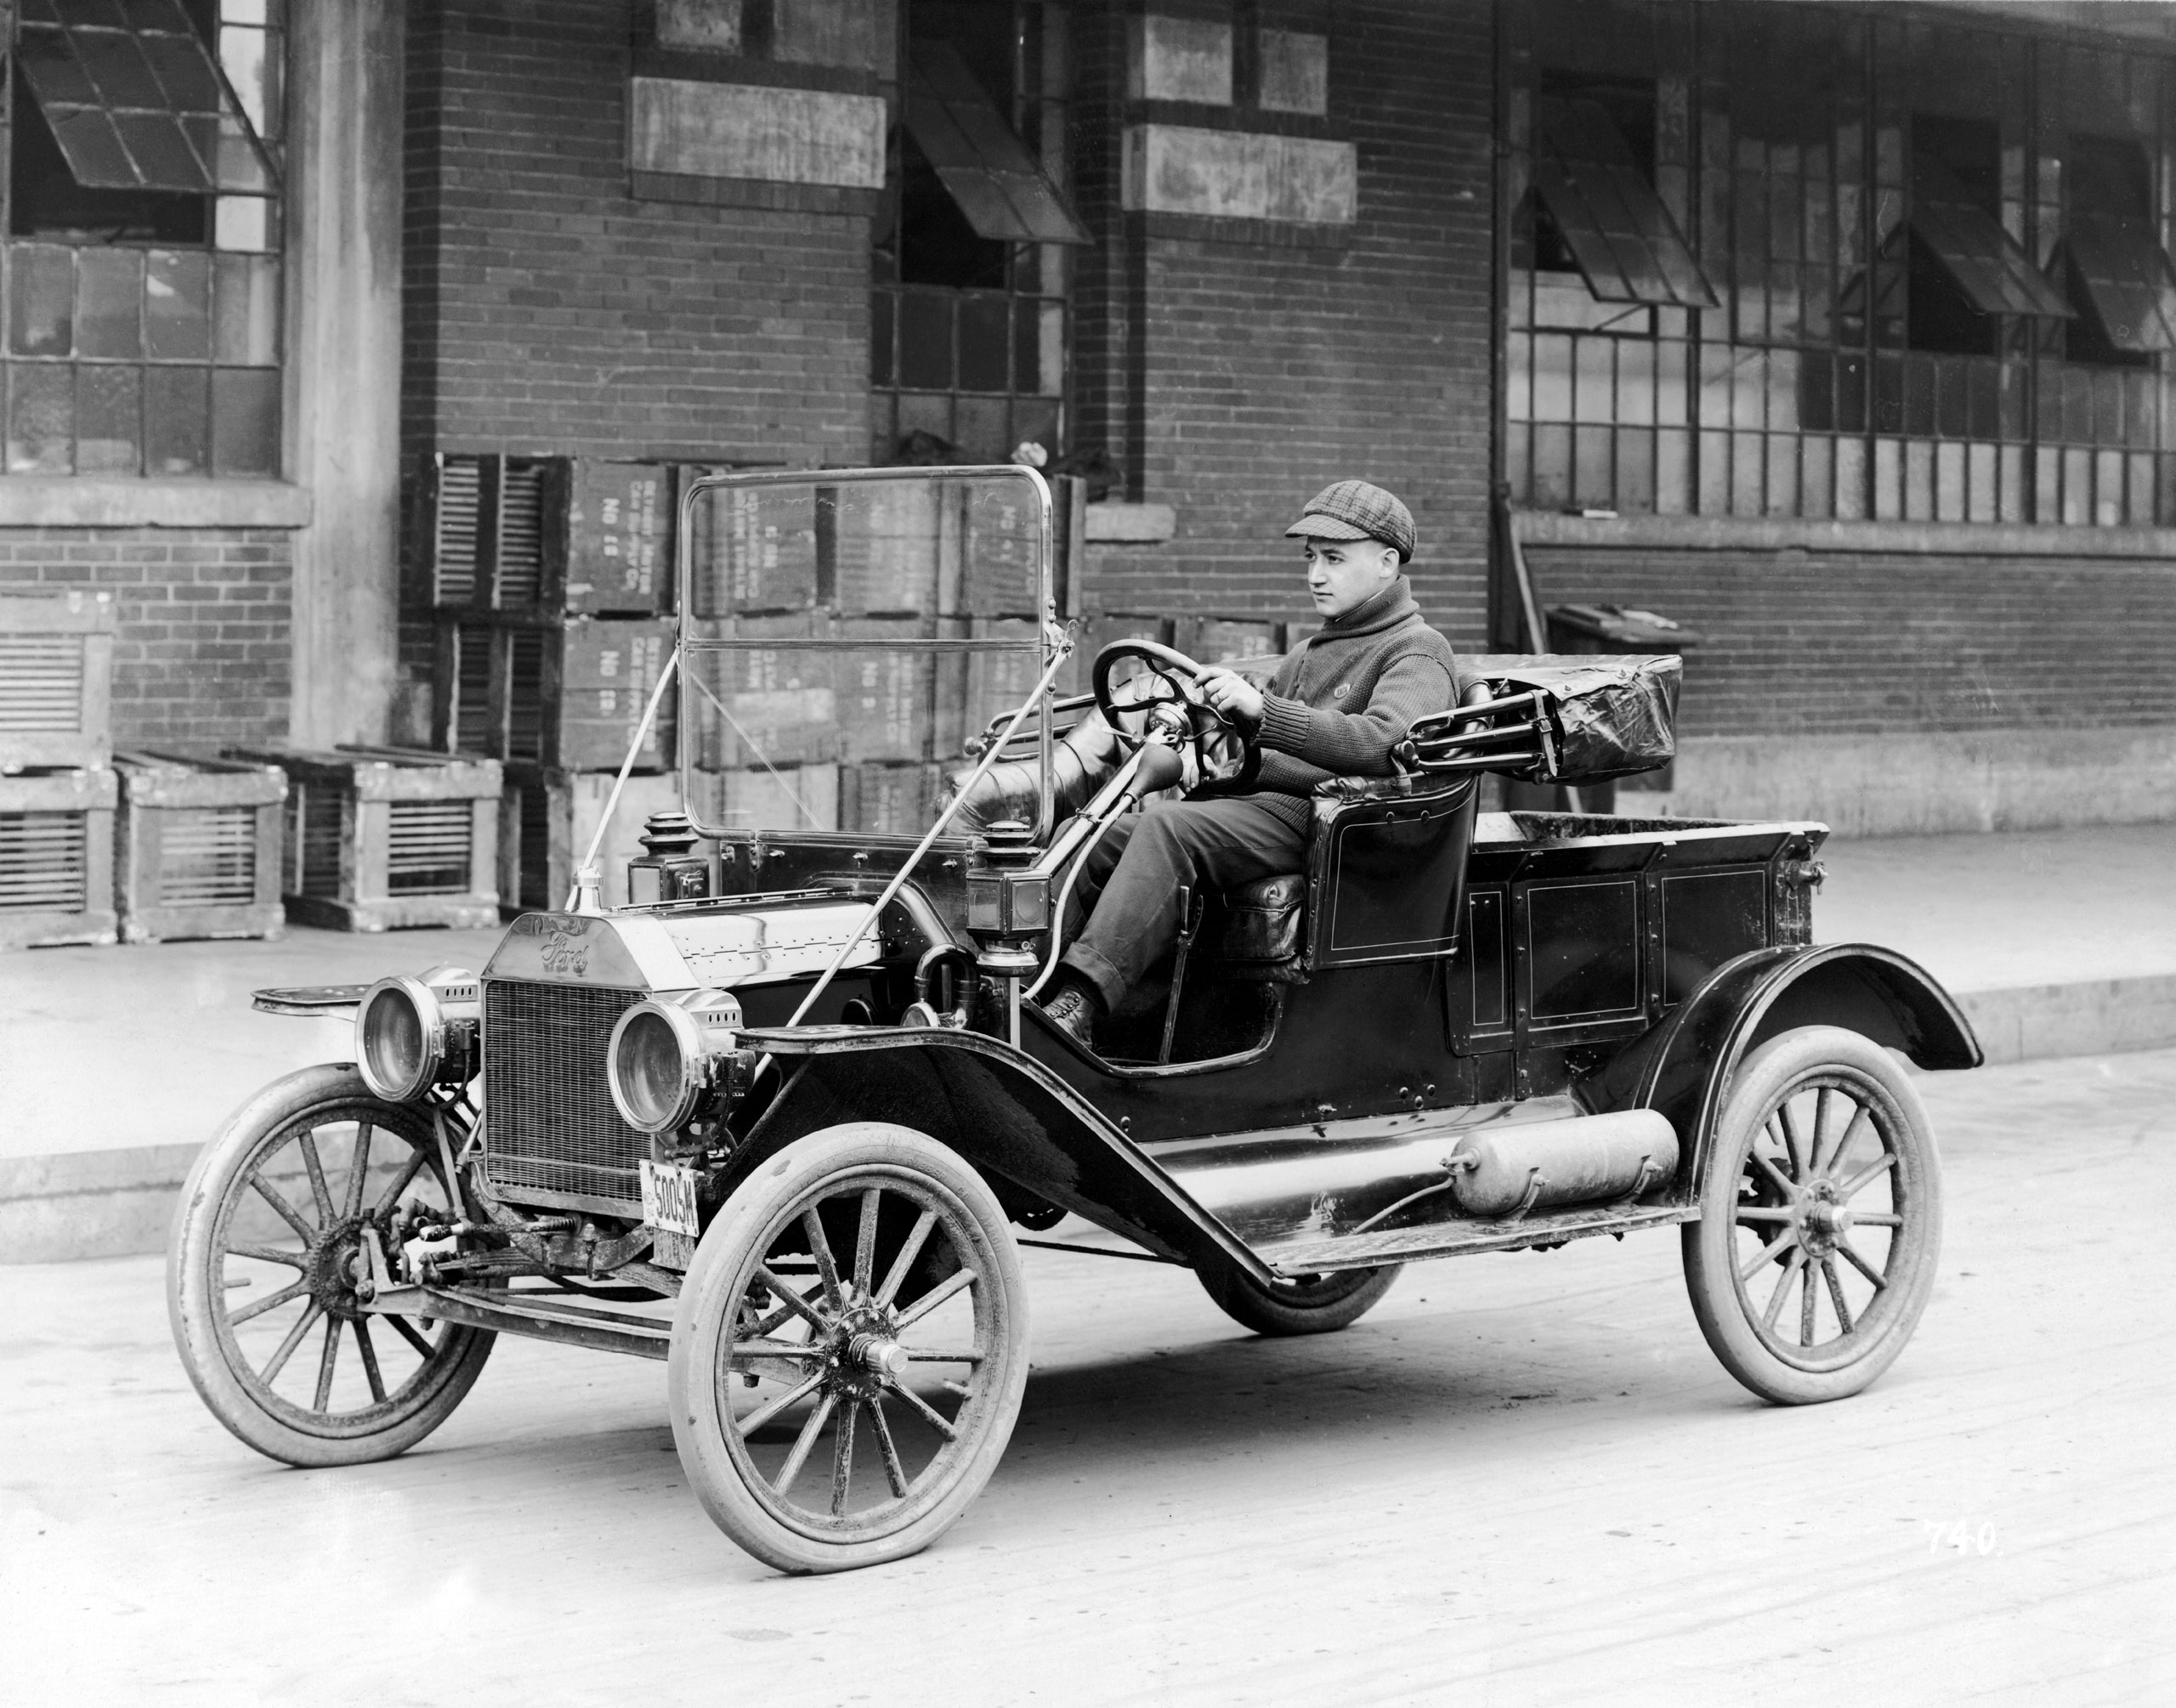 A Model T motor car, first produced by Ford in 1908.